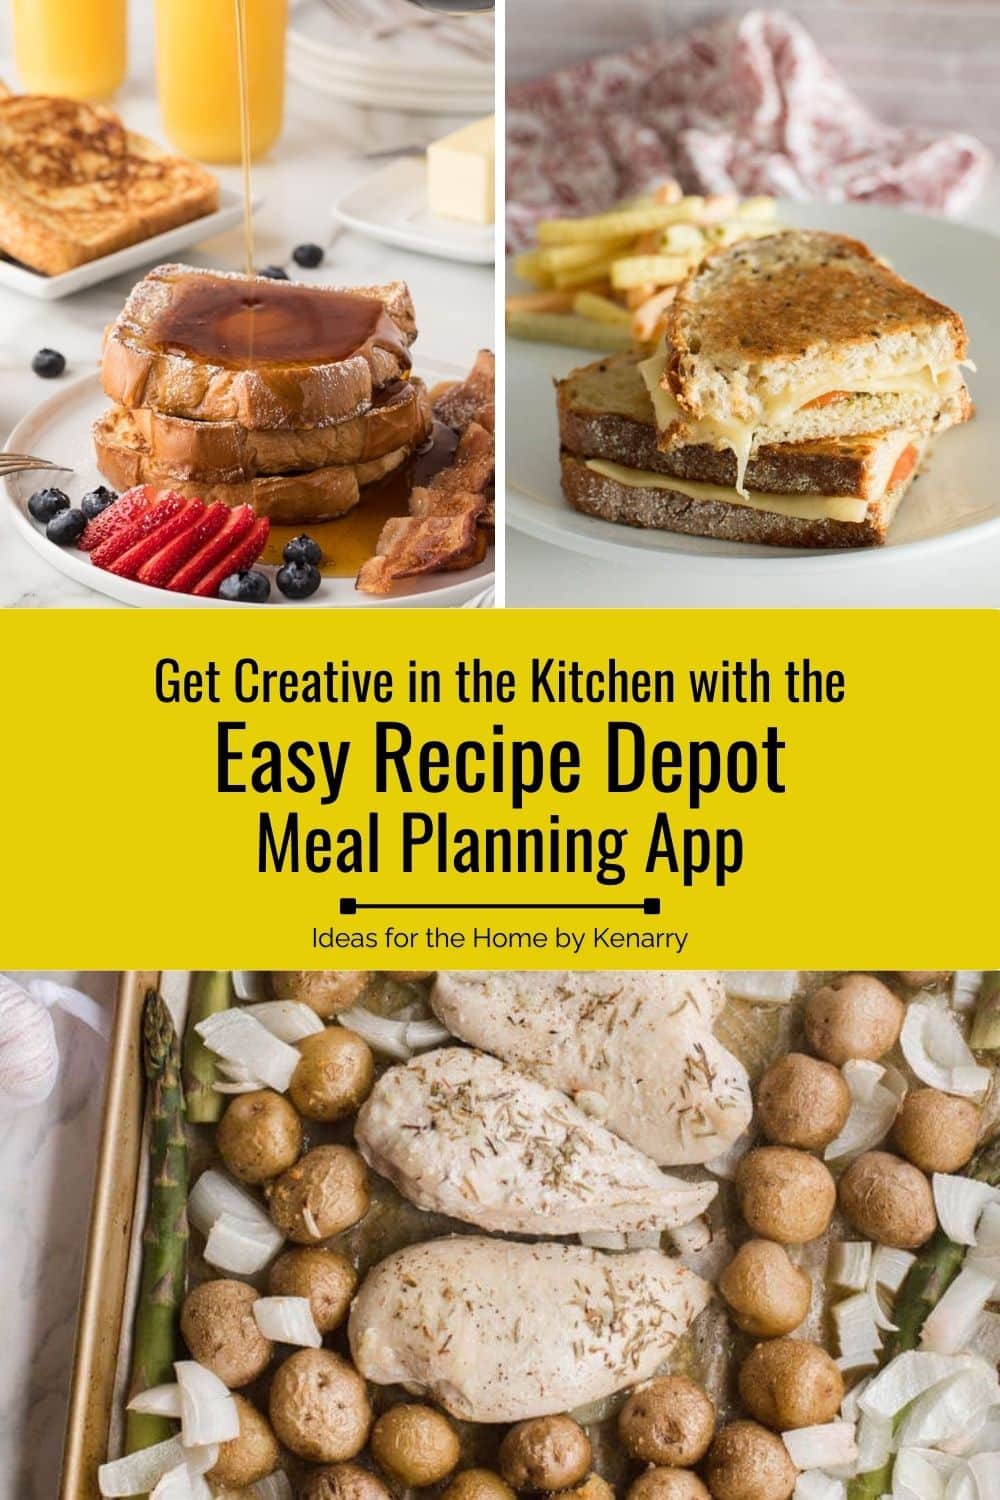 Get creative in the kitchen with the Easy Recipe Depot meal planning app.